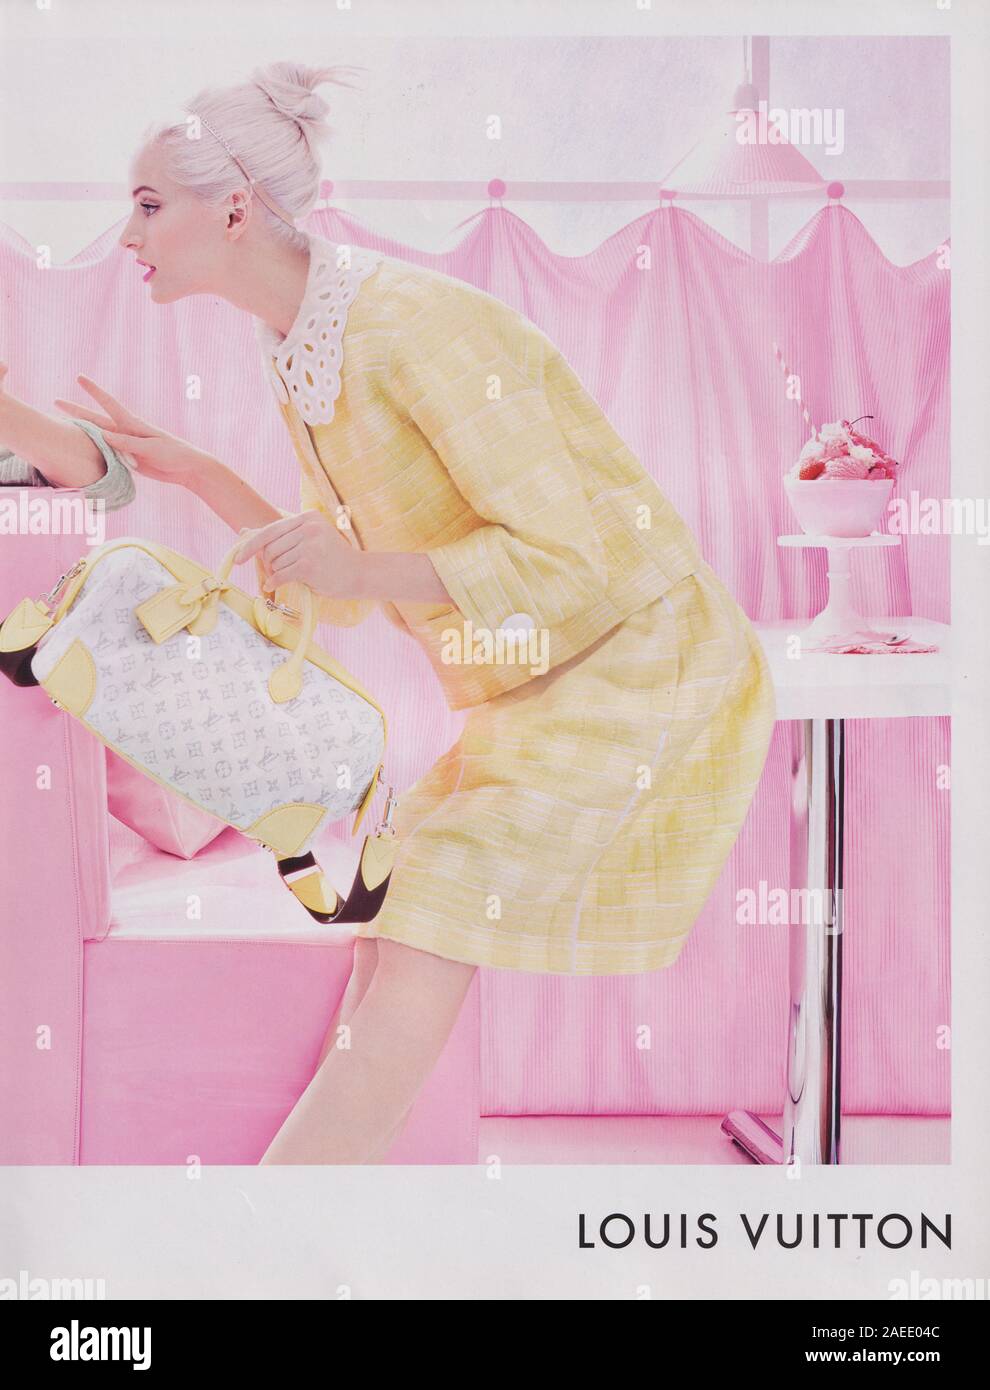 poster advertising Louis Vuitton in paper magazine from 2010 year,  advertisement, creative LV Louis Vuitton advert from 2010s Stock Photo -  Alamy